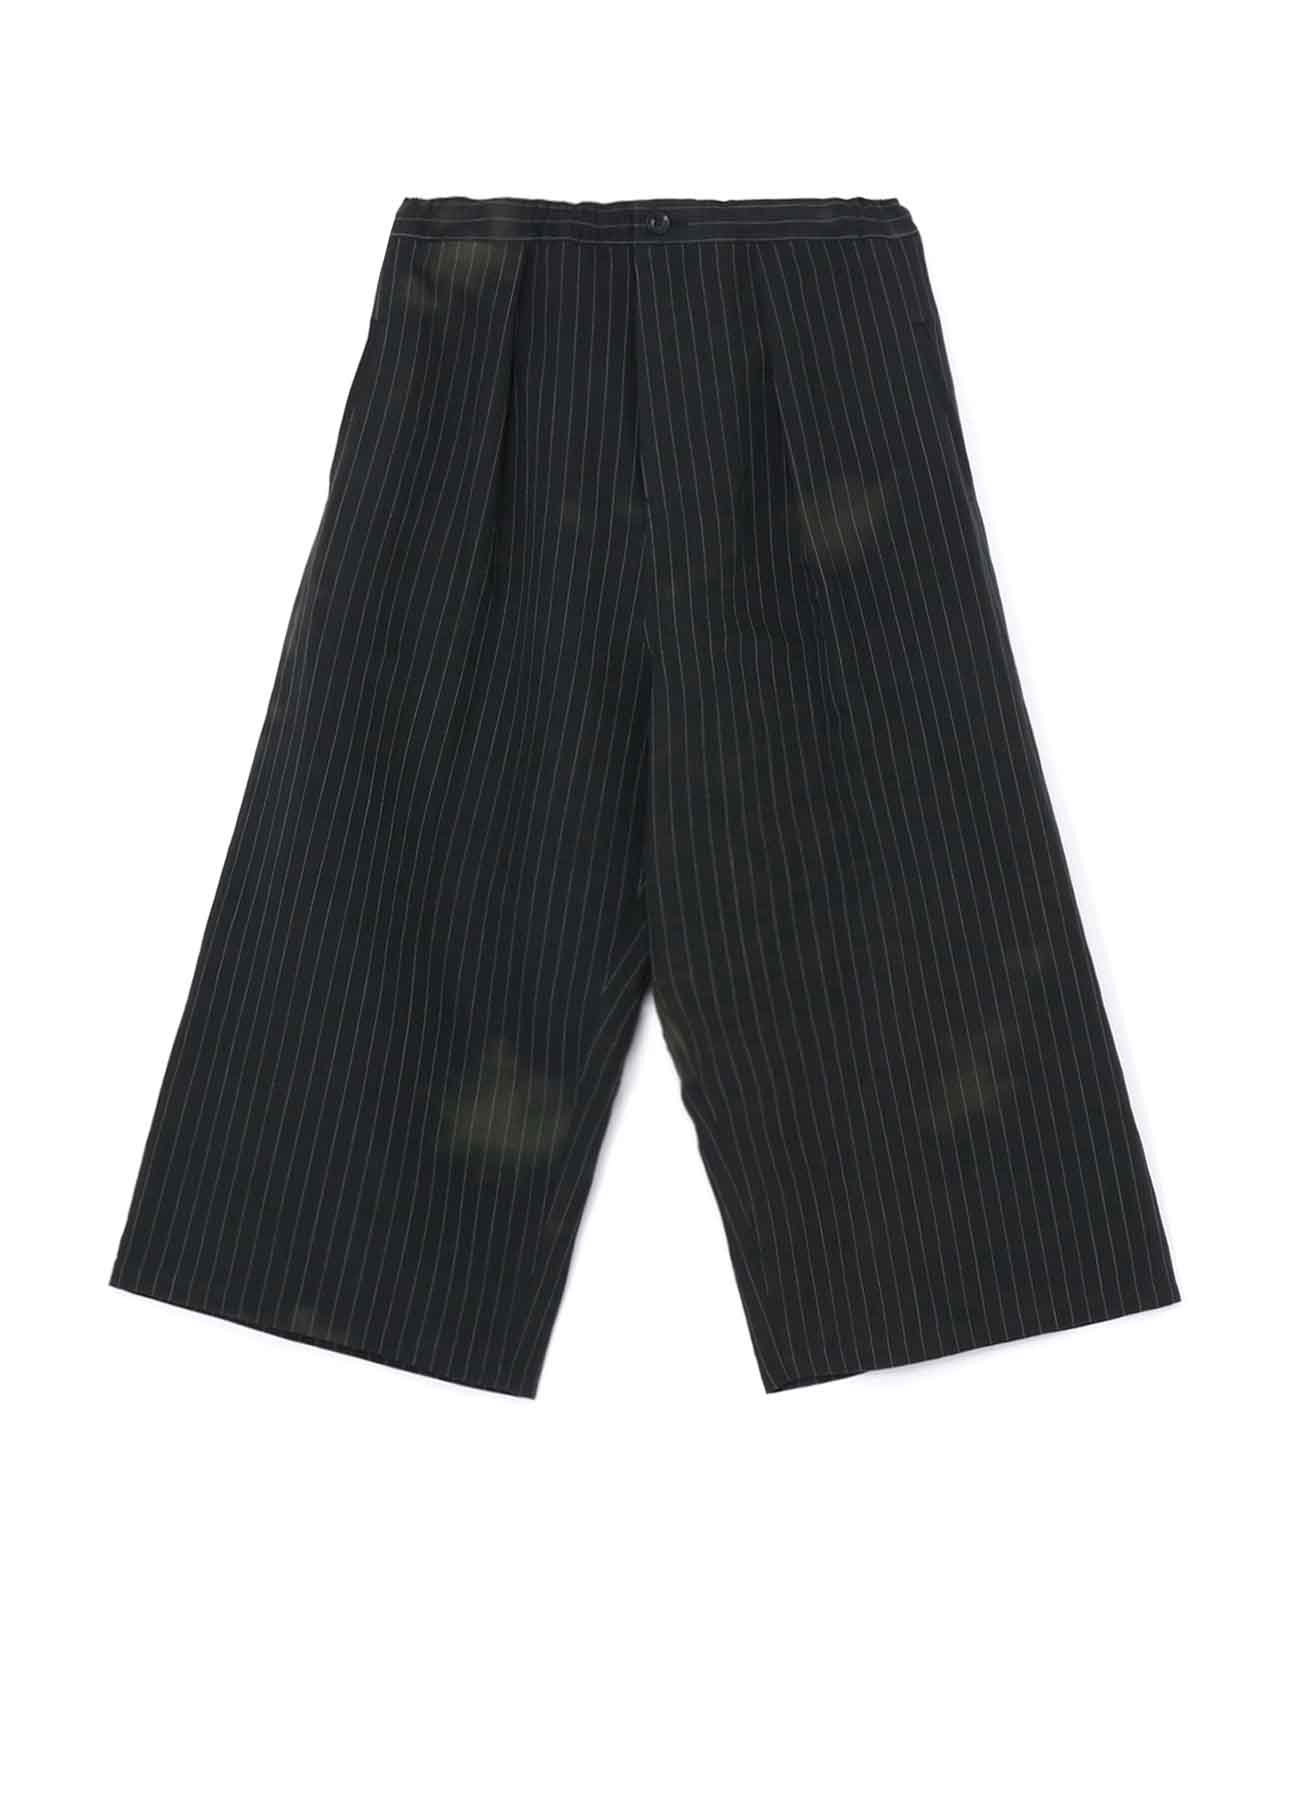 LINEN COTTON PIN-STRIPED UNEVEN DYEING FRONT TUCK WIDE PANTS